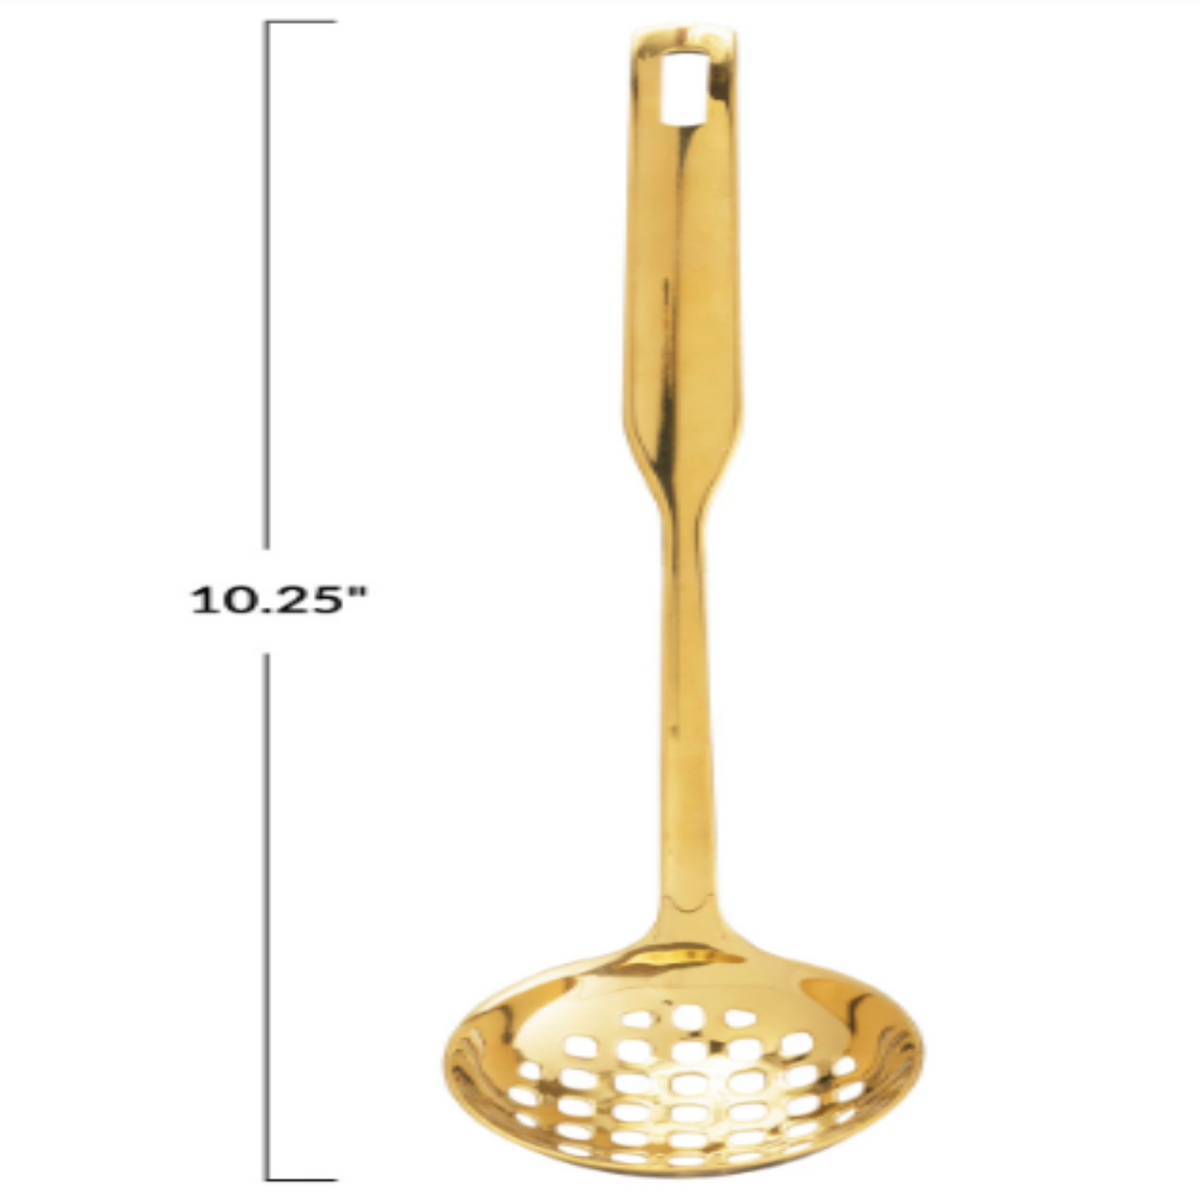 Stainless Steel Slotted Ladle - Gold Finish